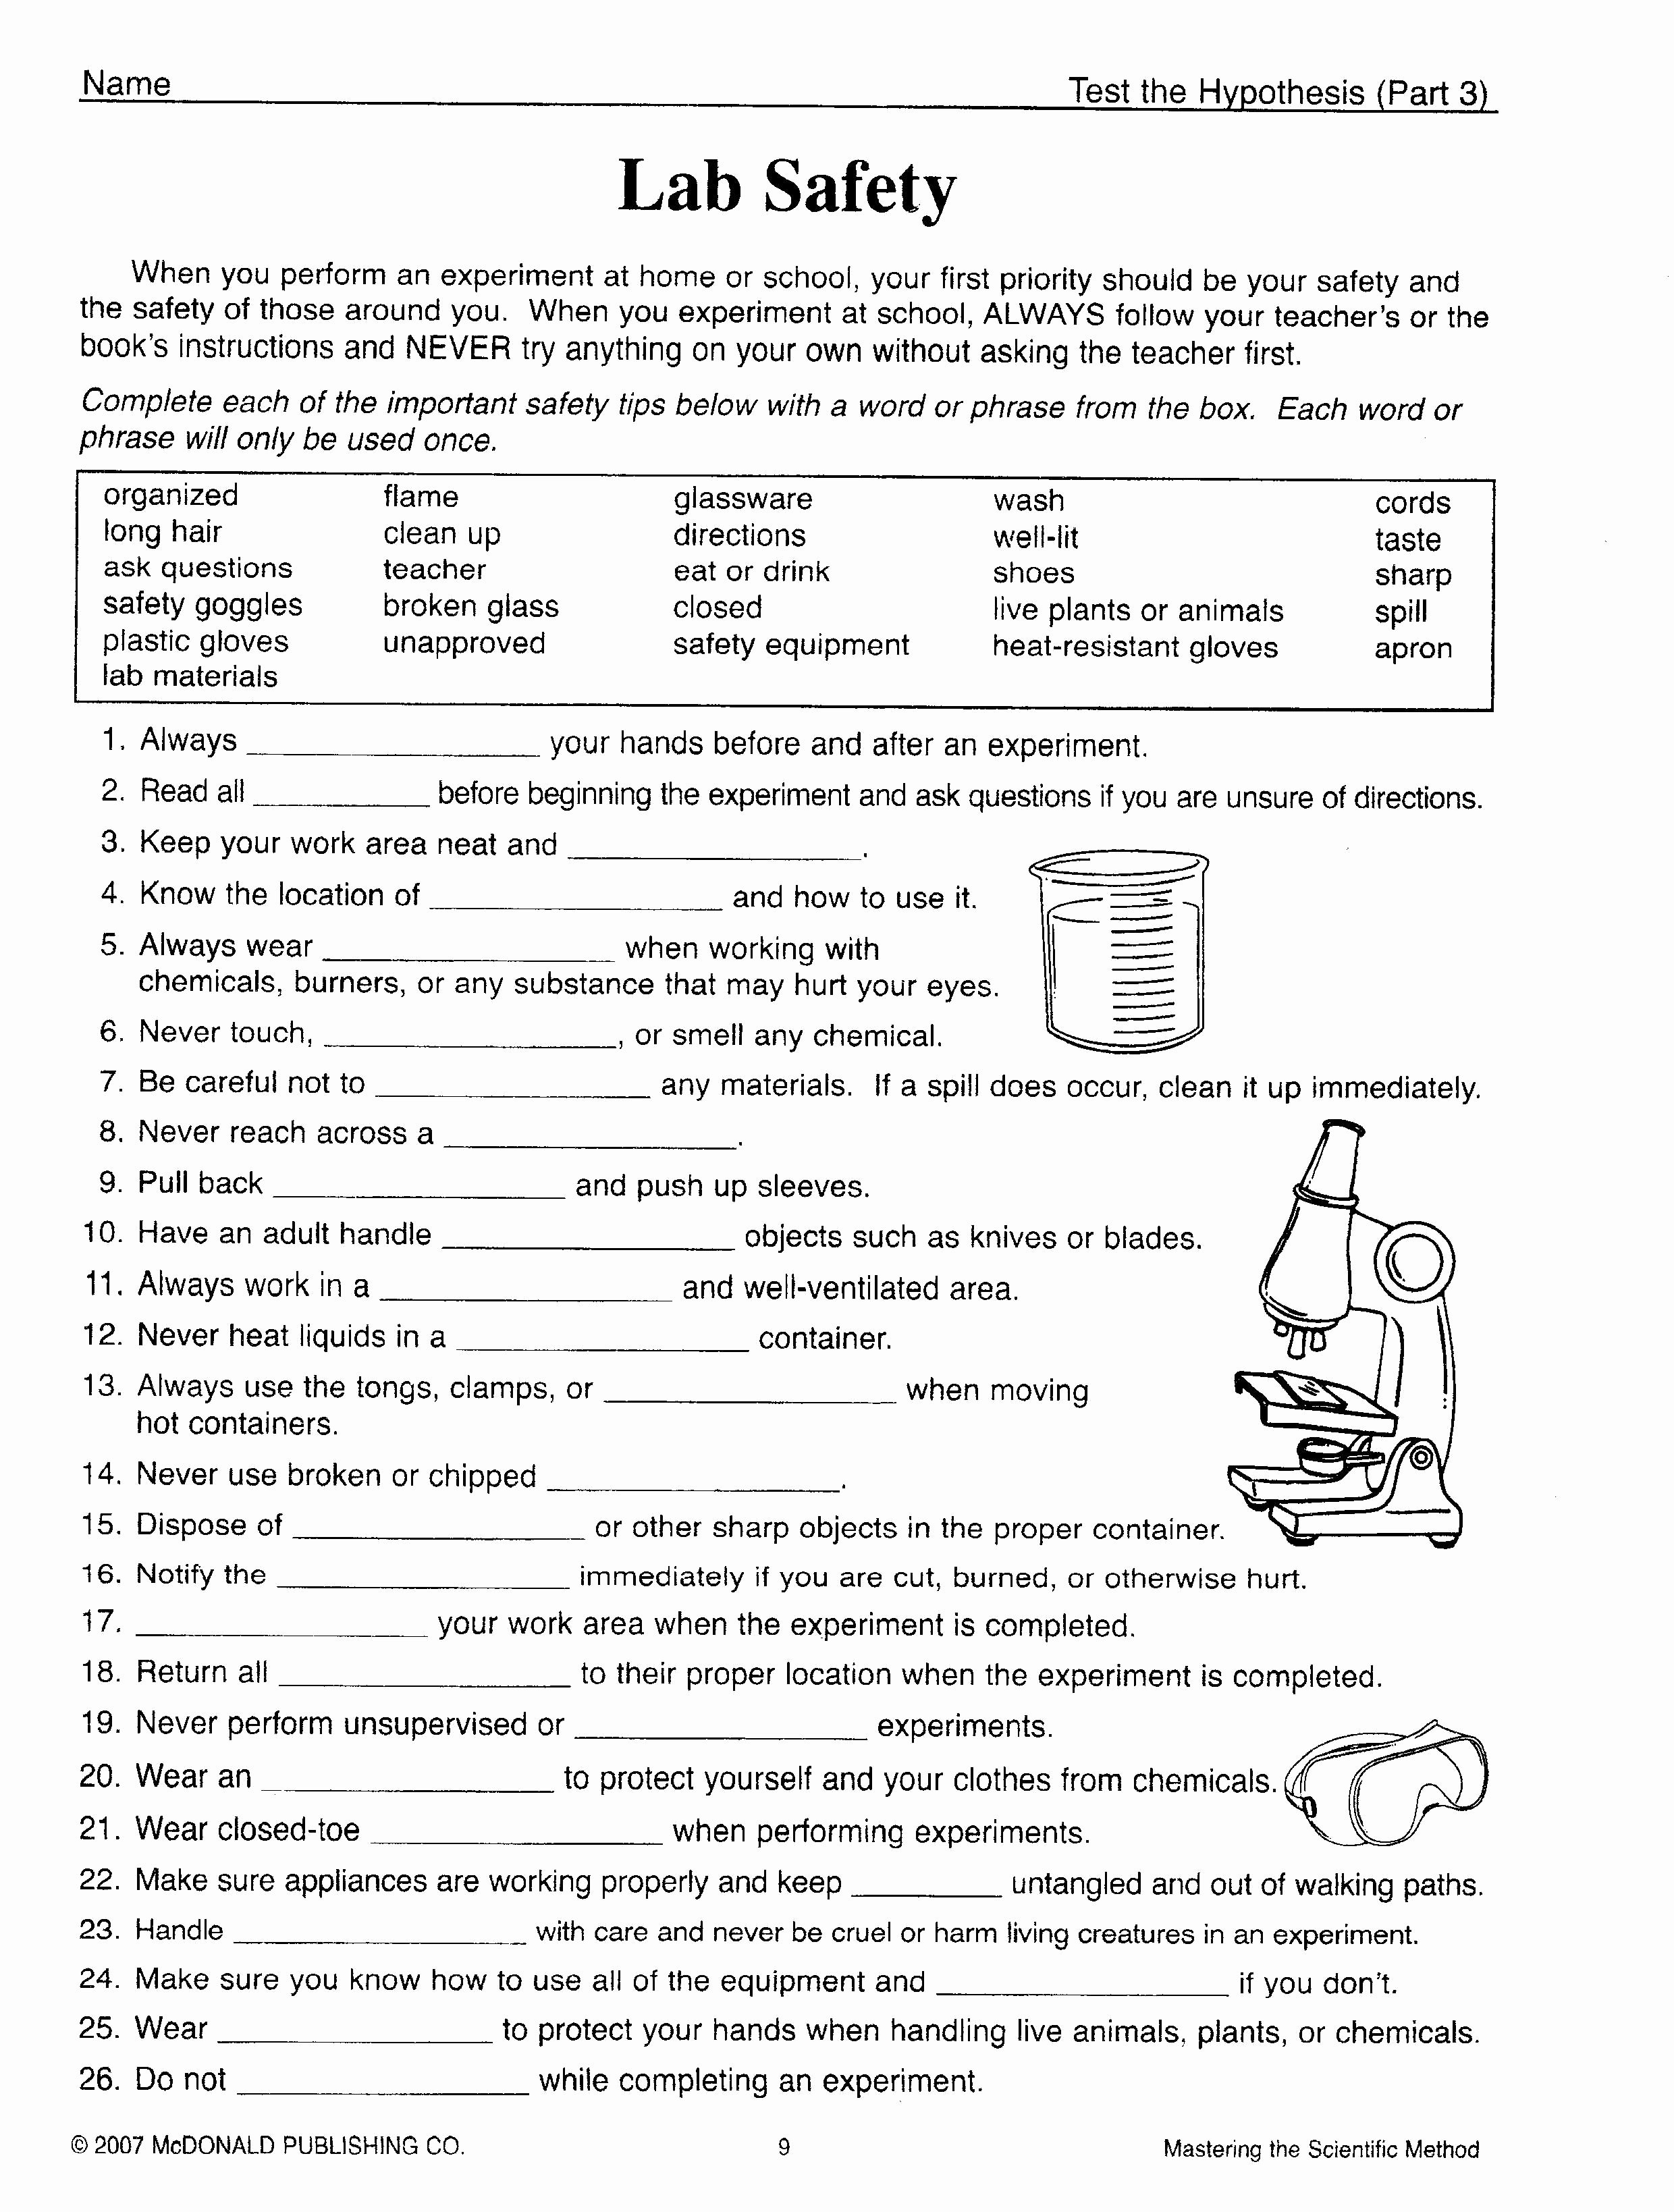 Lab Safety Worksheet Answer Key Awesome 7th Grade Science Worksheets Lab Safety 7th Grade